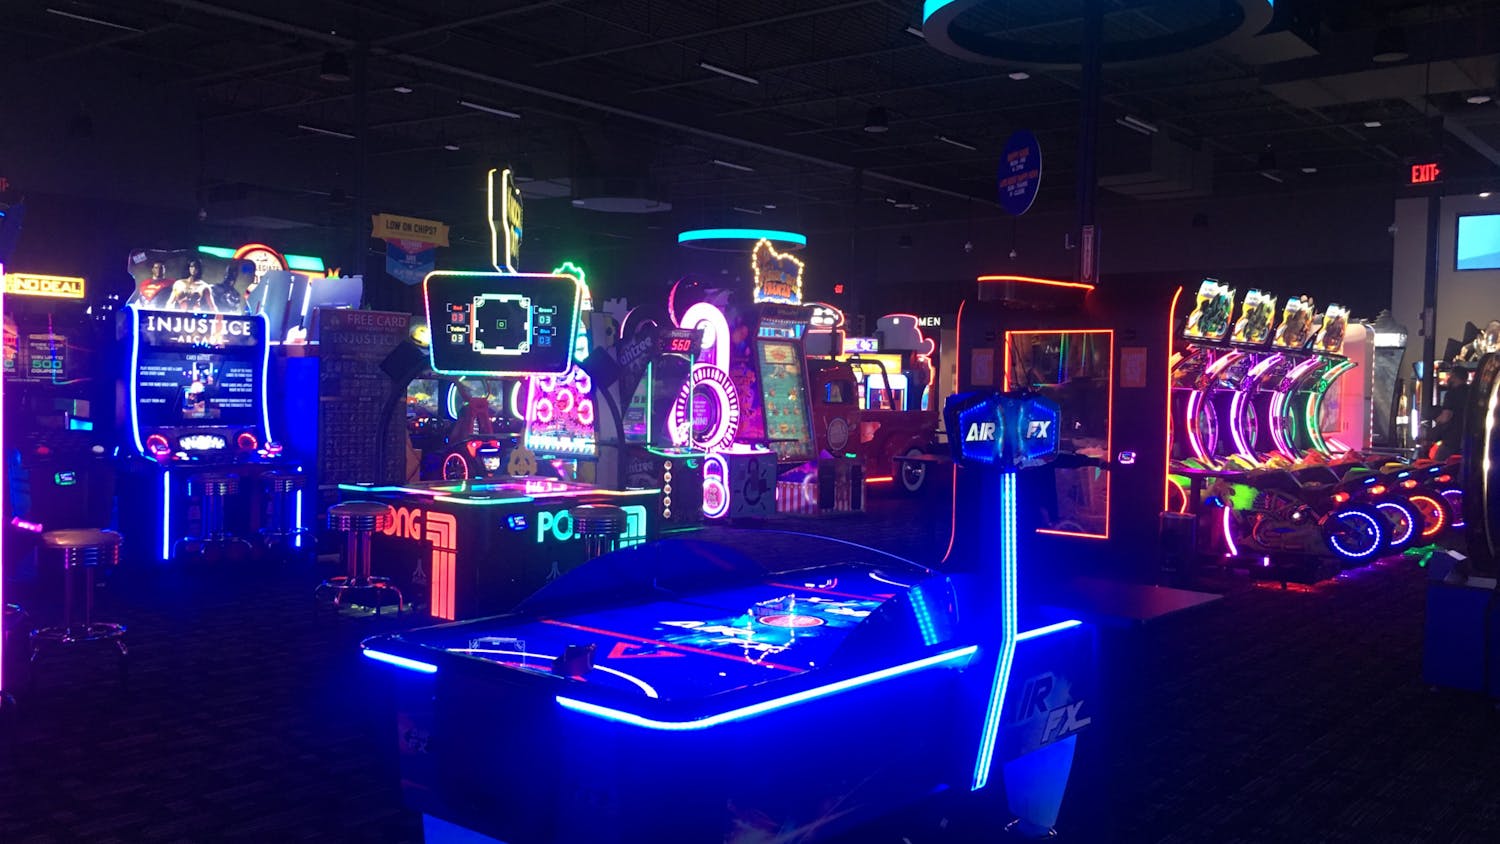 The Dave & Buster’s “Million-Dollar Midway” features a number of classic arcade games.